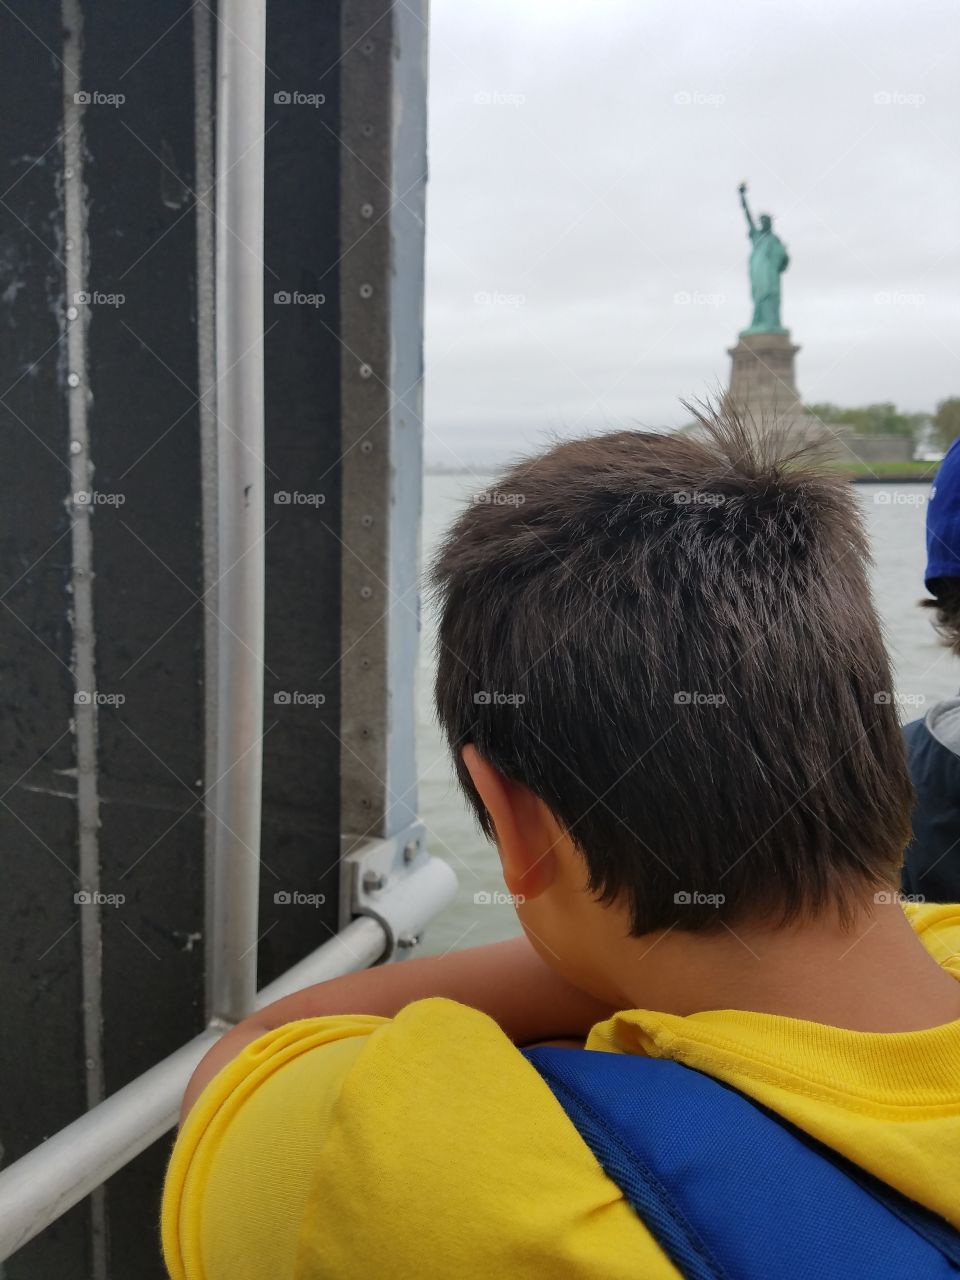 gazing at the statue of liberty